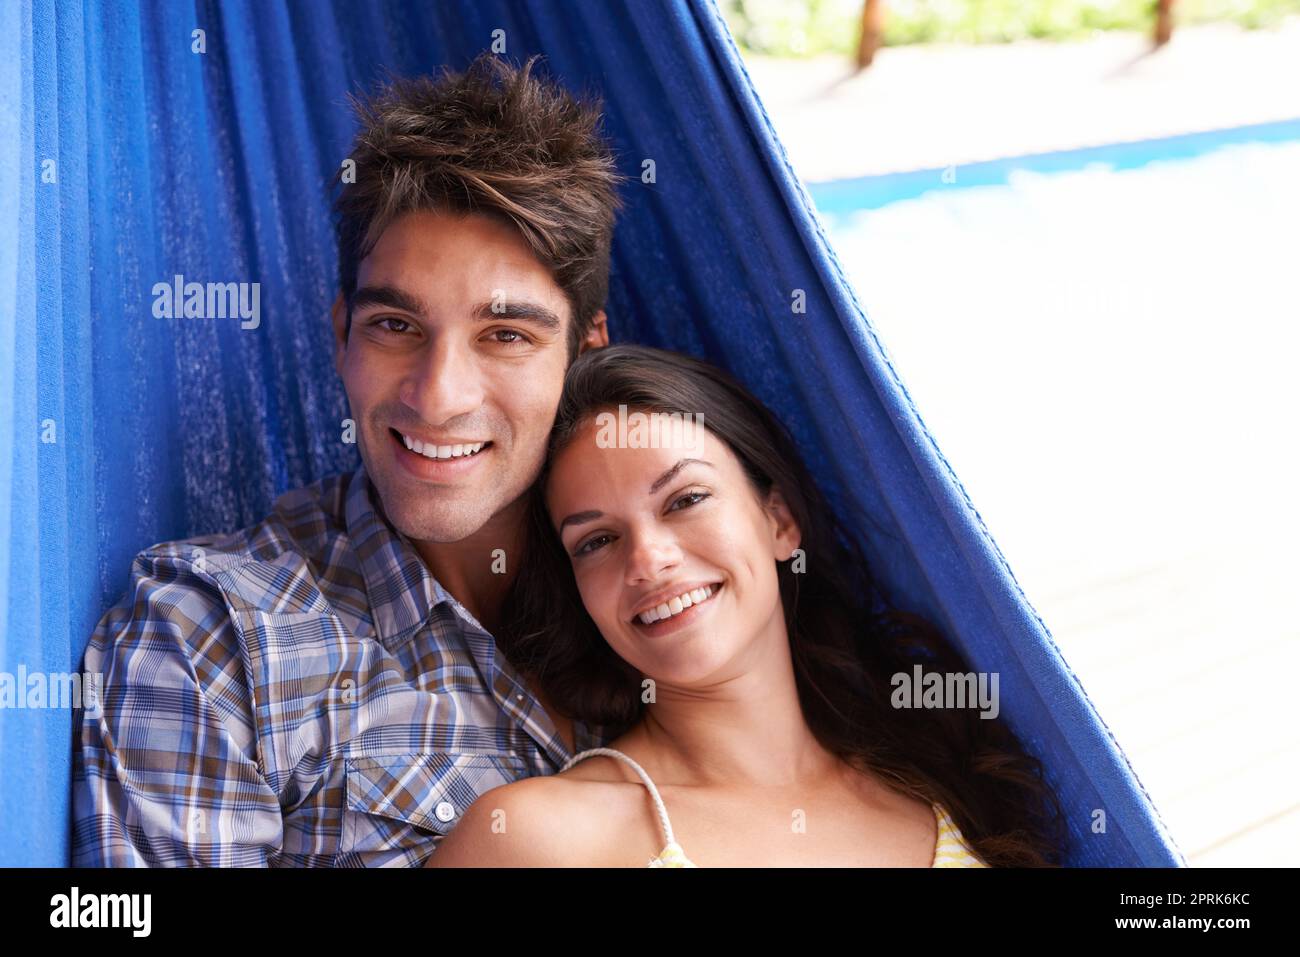 Happy holiday together. Portrait of an affectionate young couple lying in a hammock Stock Photo